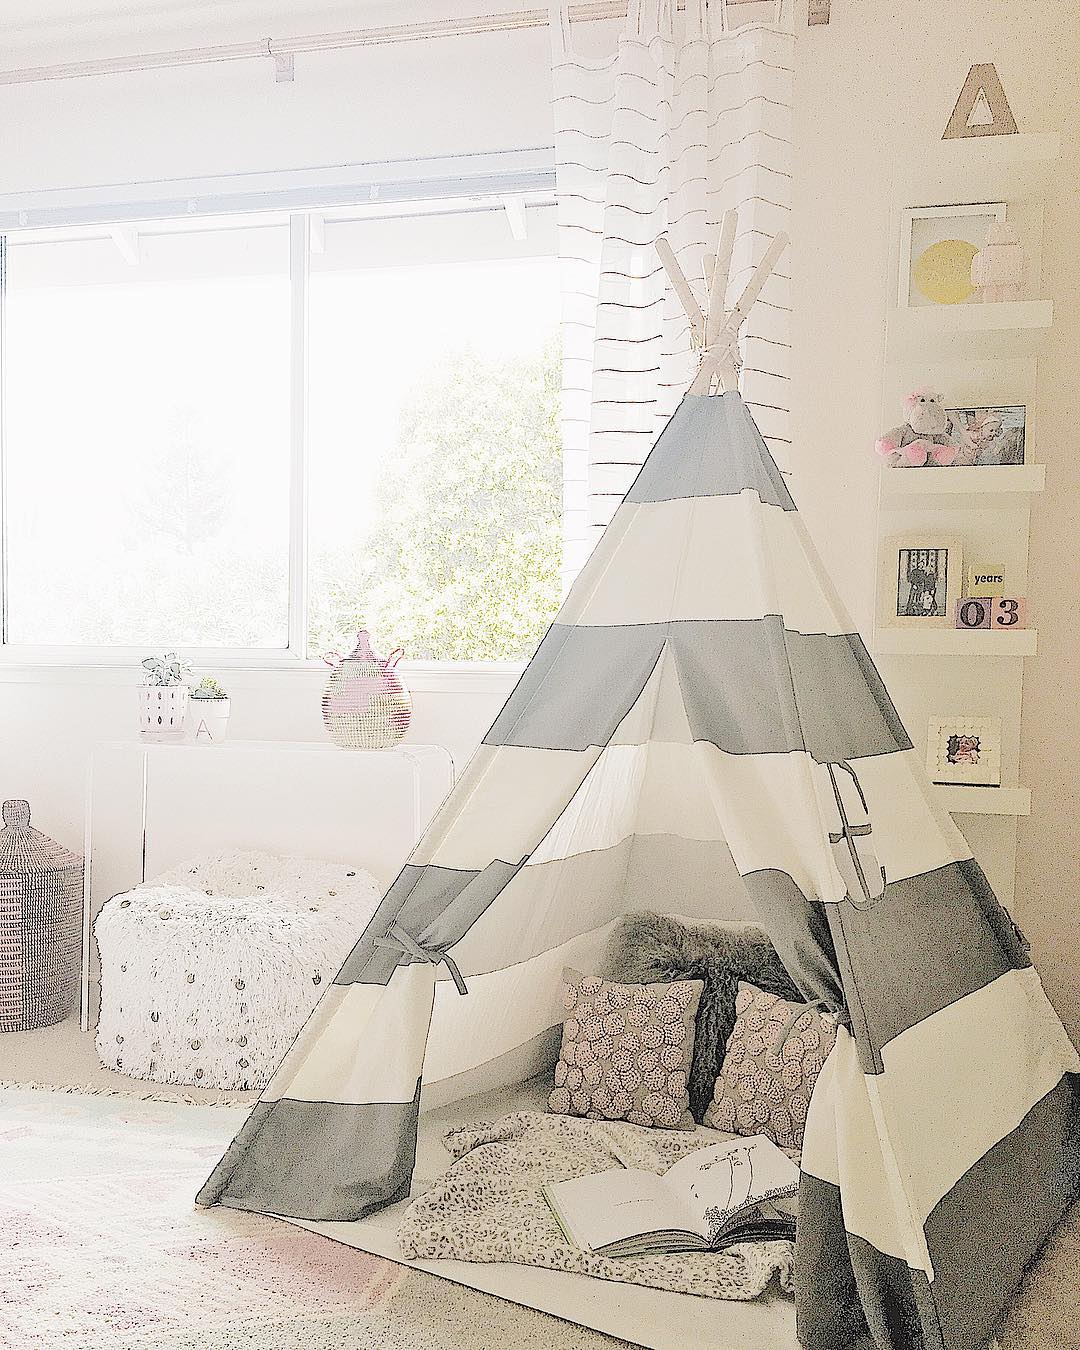 Nursery with gray and white tent. Photo by Instagram user @lindsaysaccullointeriors